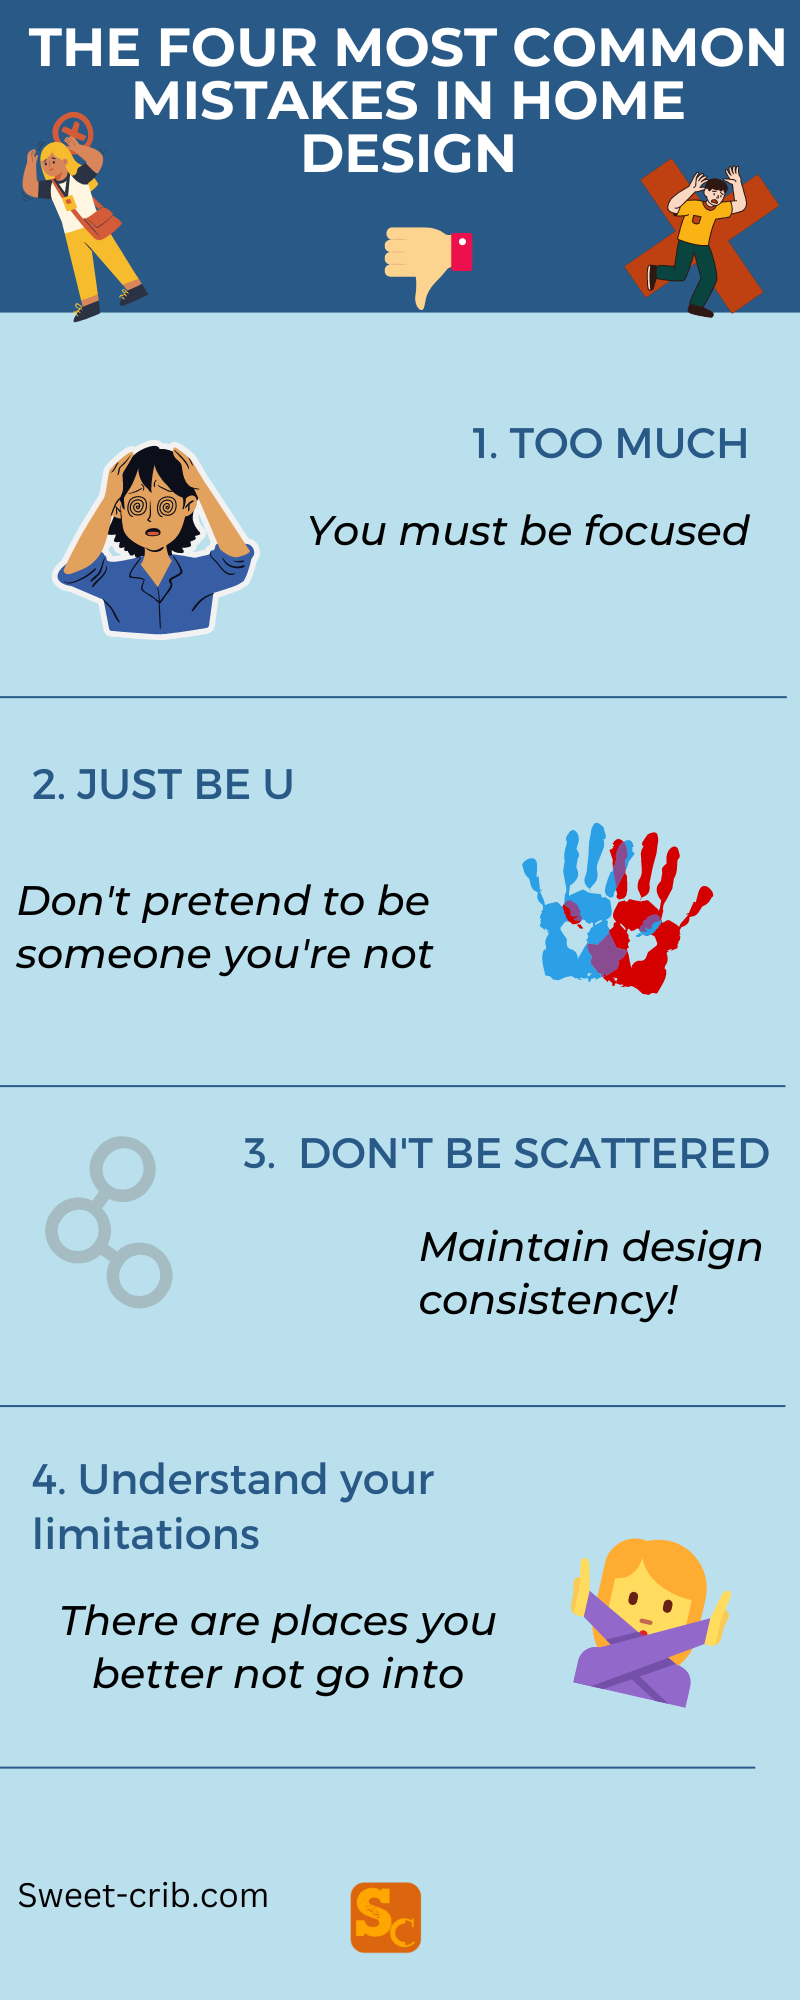 Infographic for Common Interior Design Mistakes